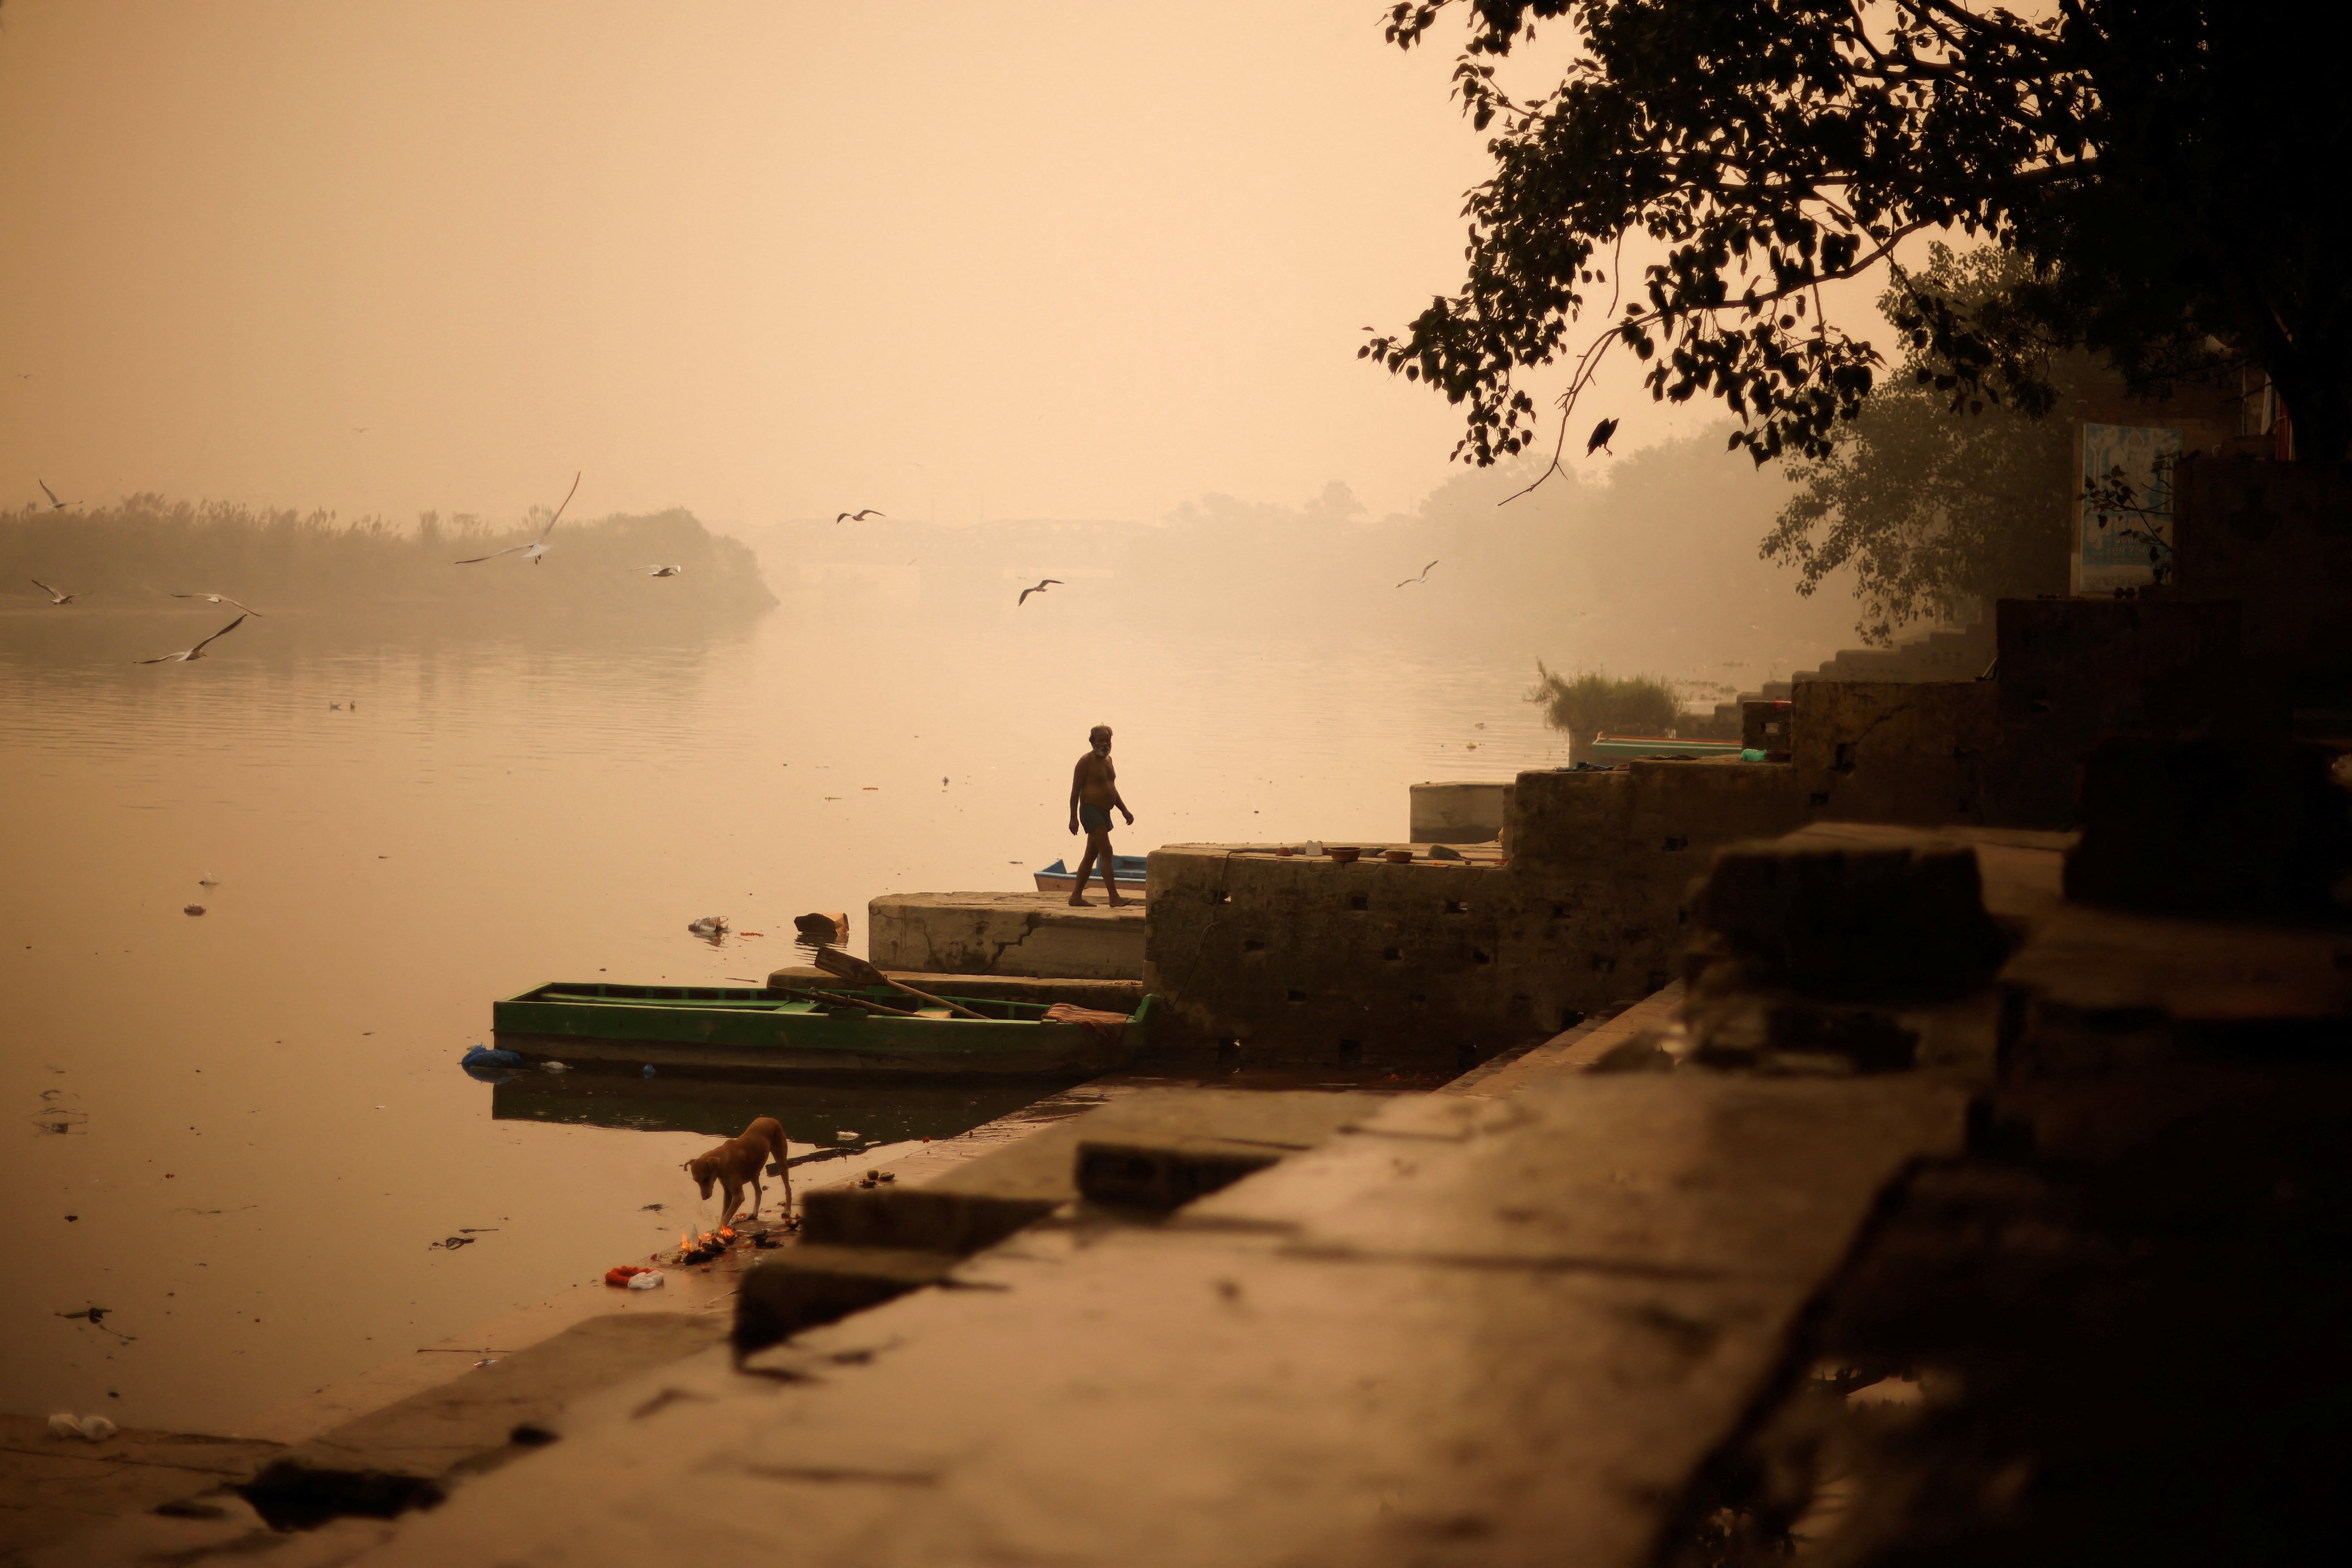 A Hindu man walks after praying as heavy smog covers the banks of the river Yamuna